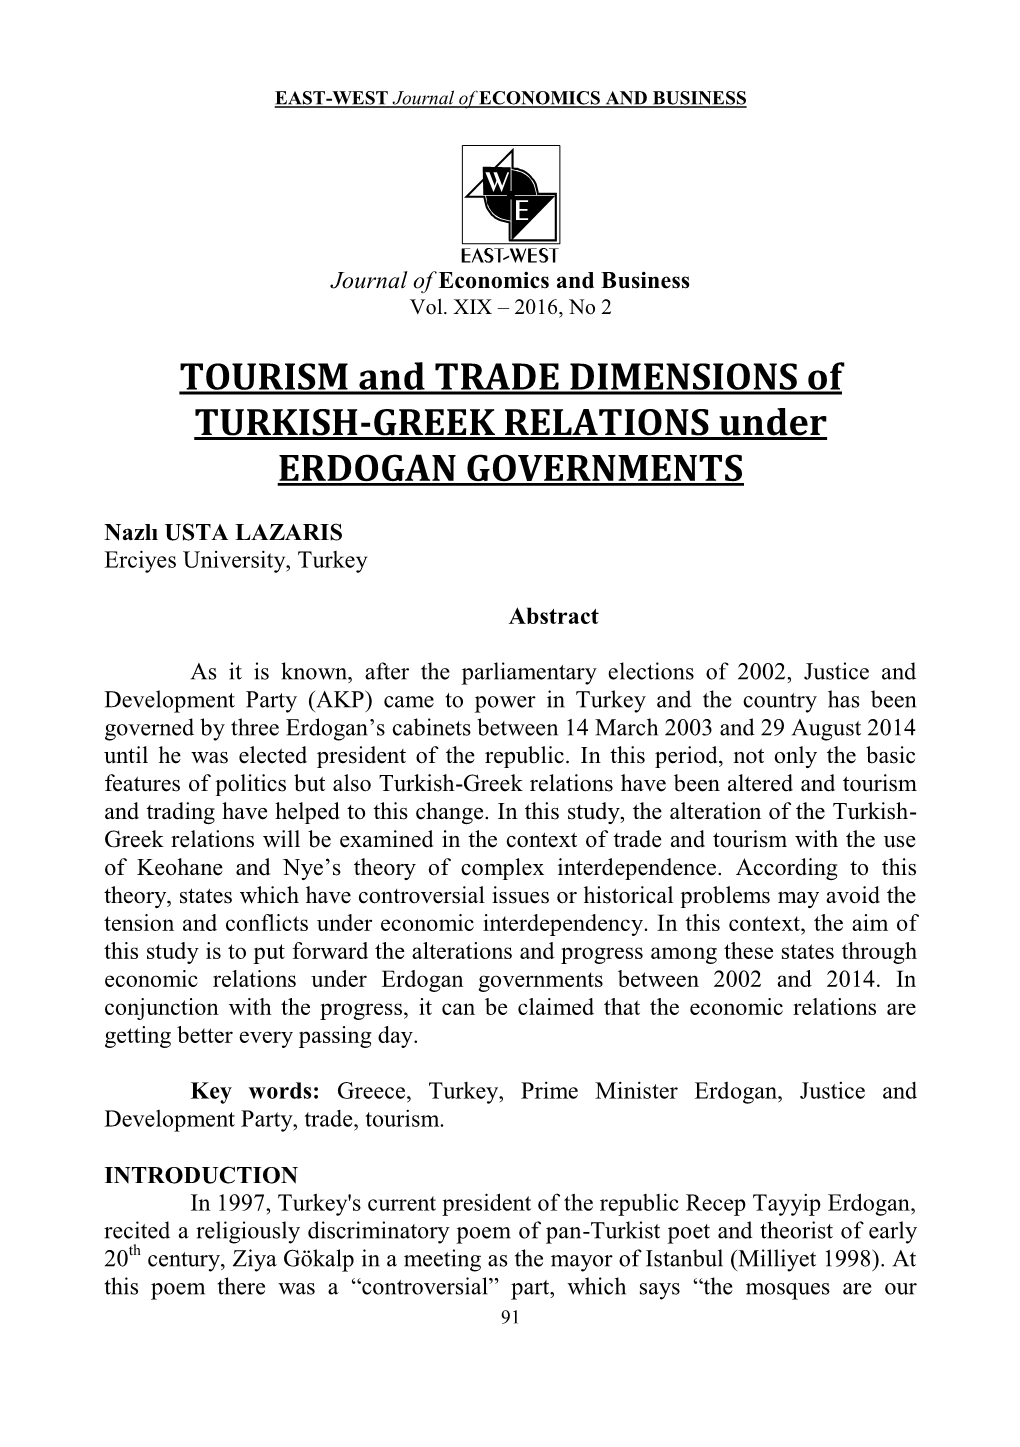 TOURISM and TRADE DIMENSIONS of TURKISH-GREEK RELATIONS Under ERDOGAN GOVERNMENTS